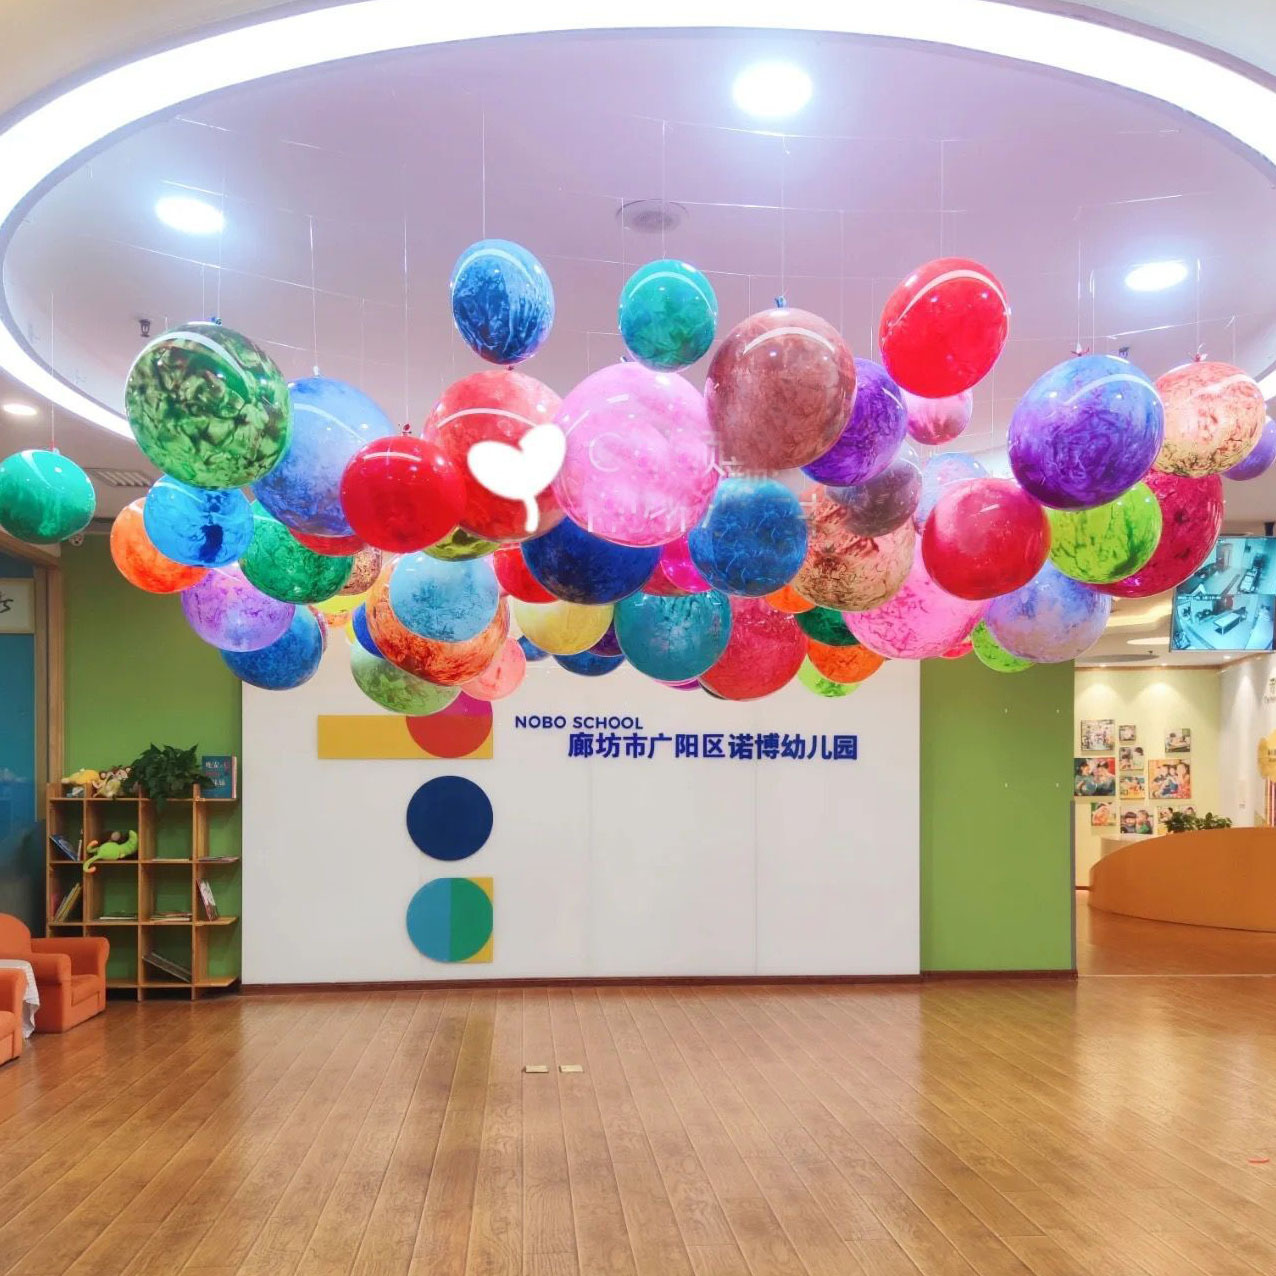 Creative Acrylic Paint Blooming Transparent Bounce Ball Studio Internet Celebrity Store Celebration Shopping Mall Opening Event Scene Decoration